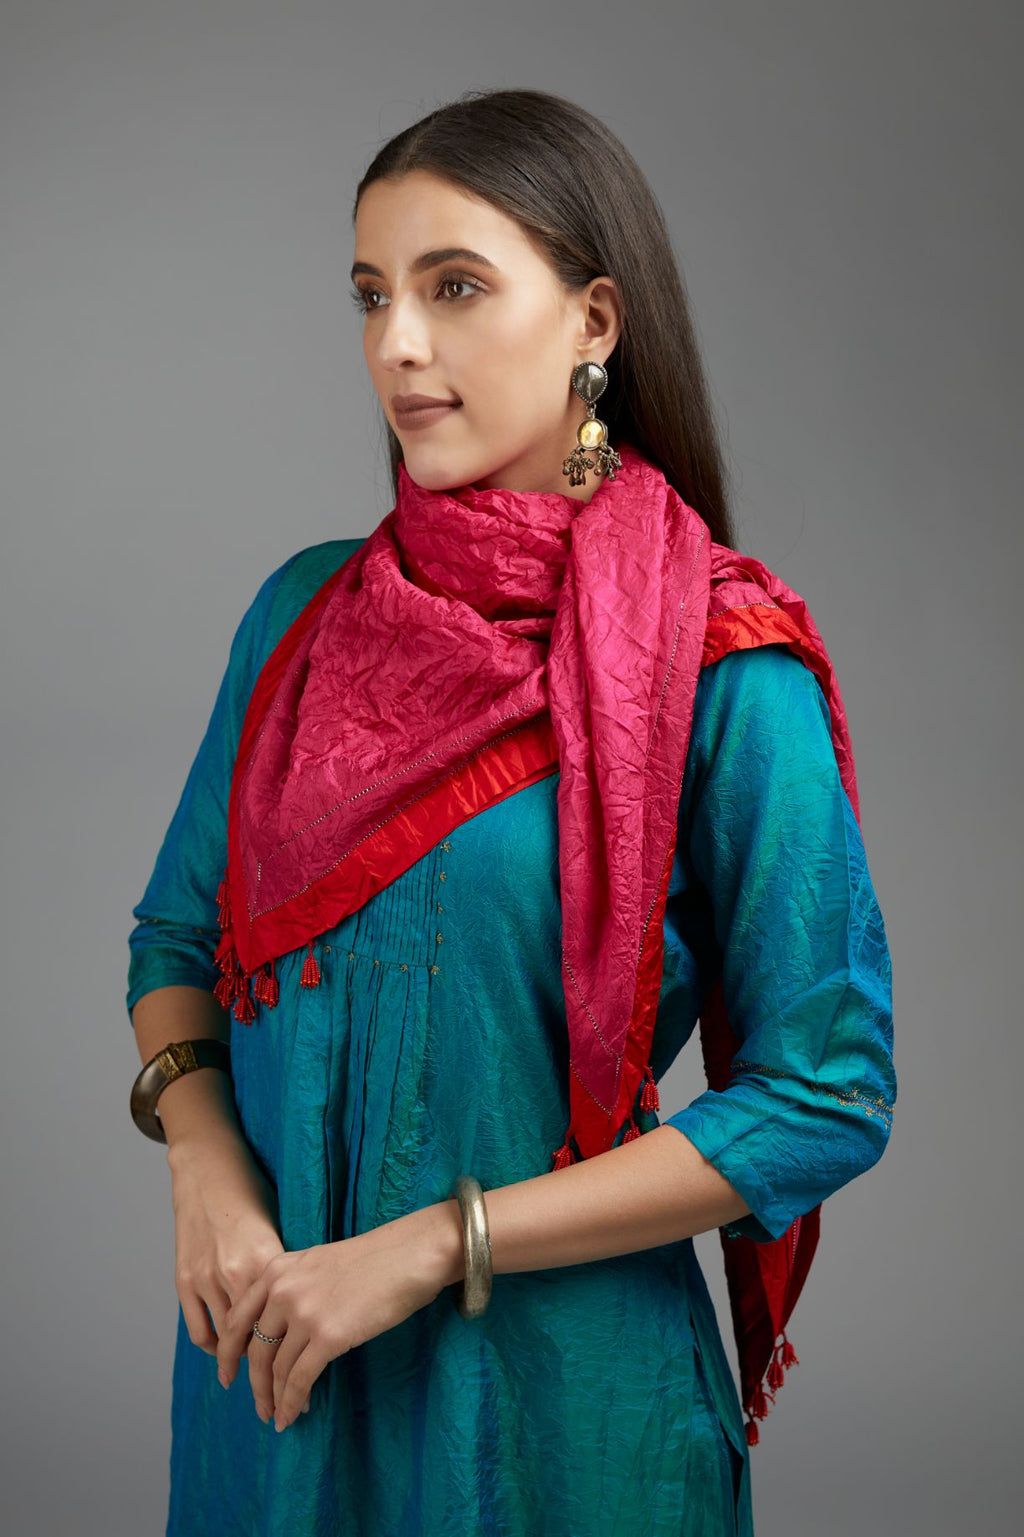 Hand crushed fuchsia silk scarf with contrasting red silk fabric at edges joint with gold zari faggoting